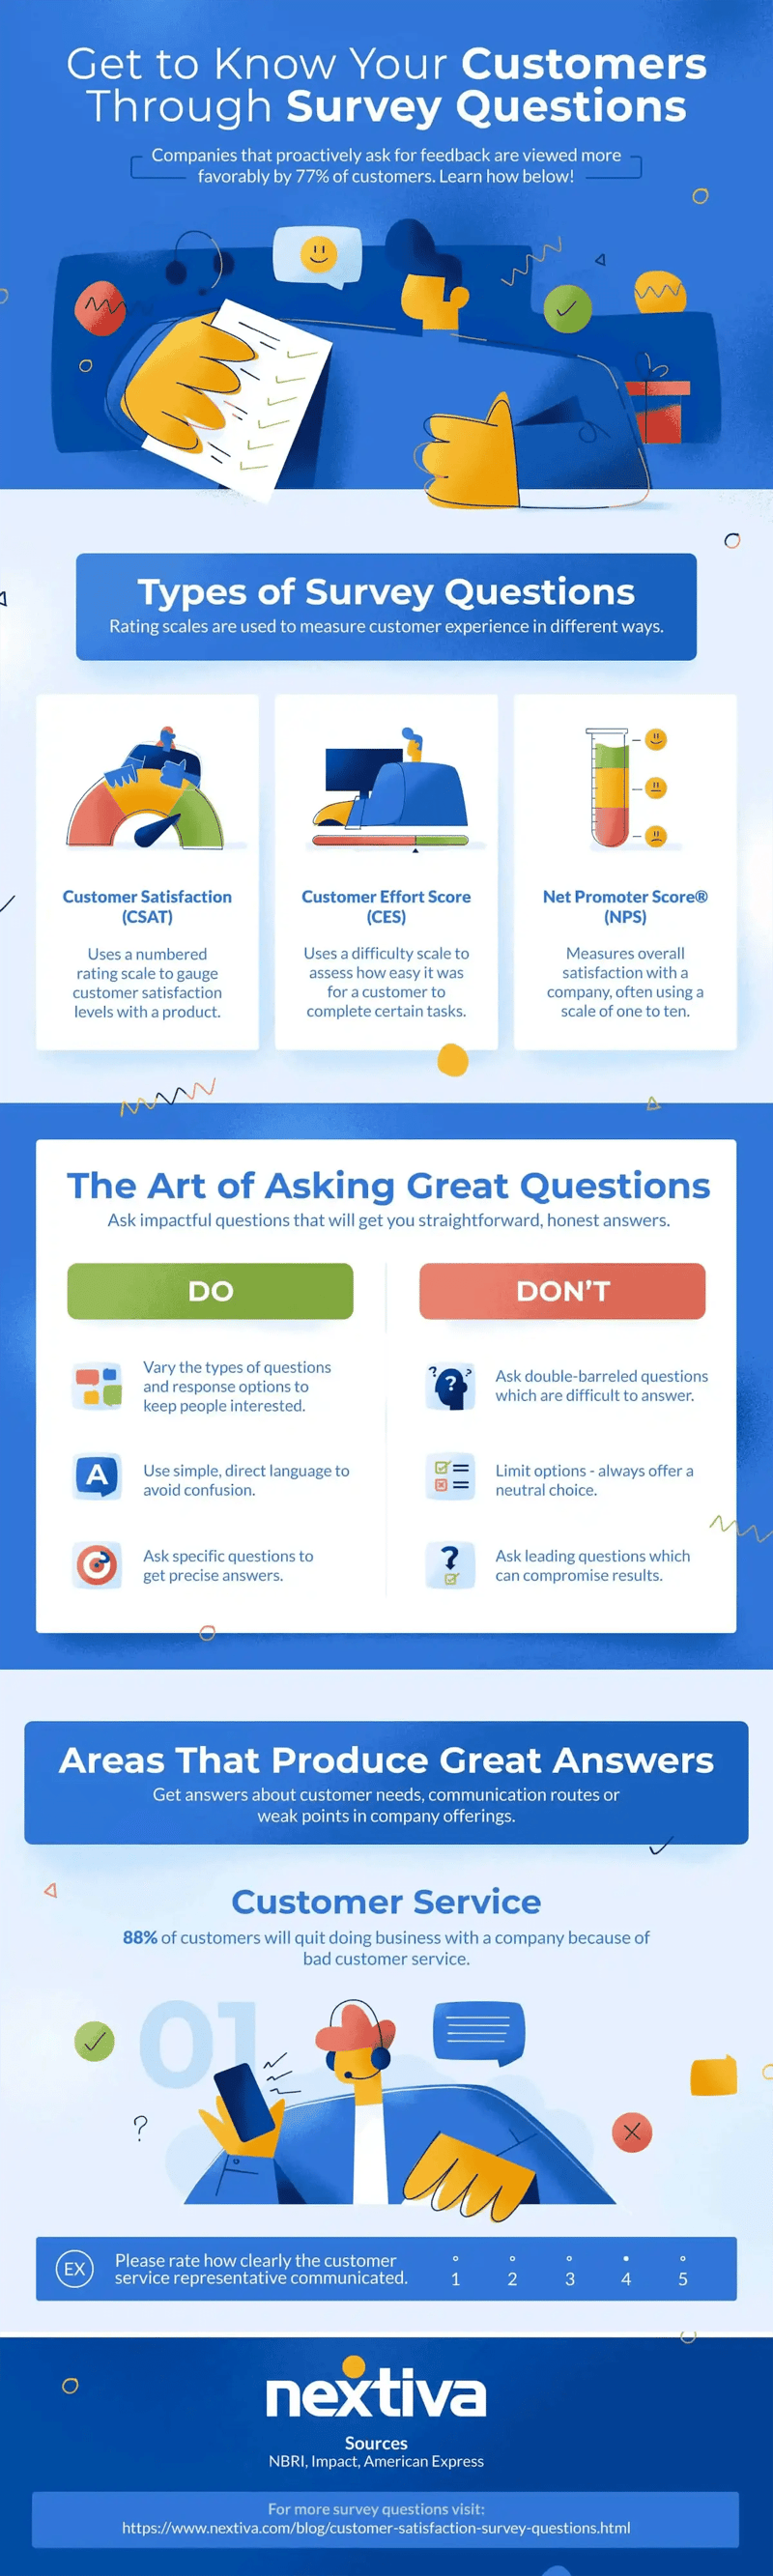 Nextiva's get to know your customer infographic